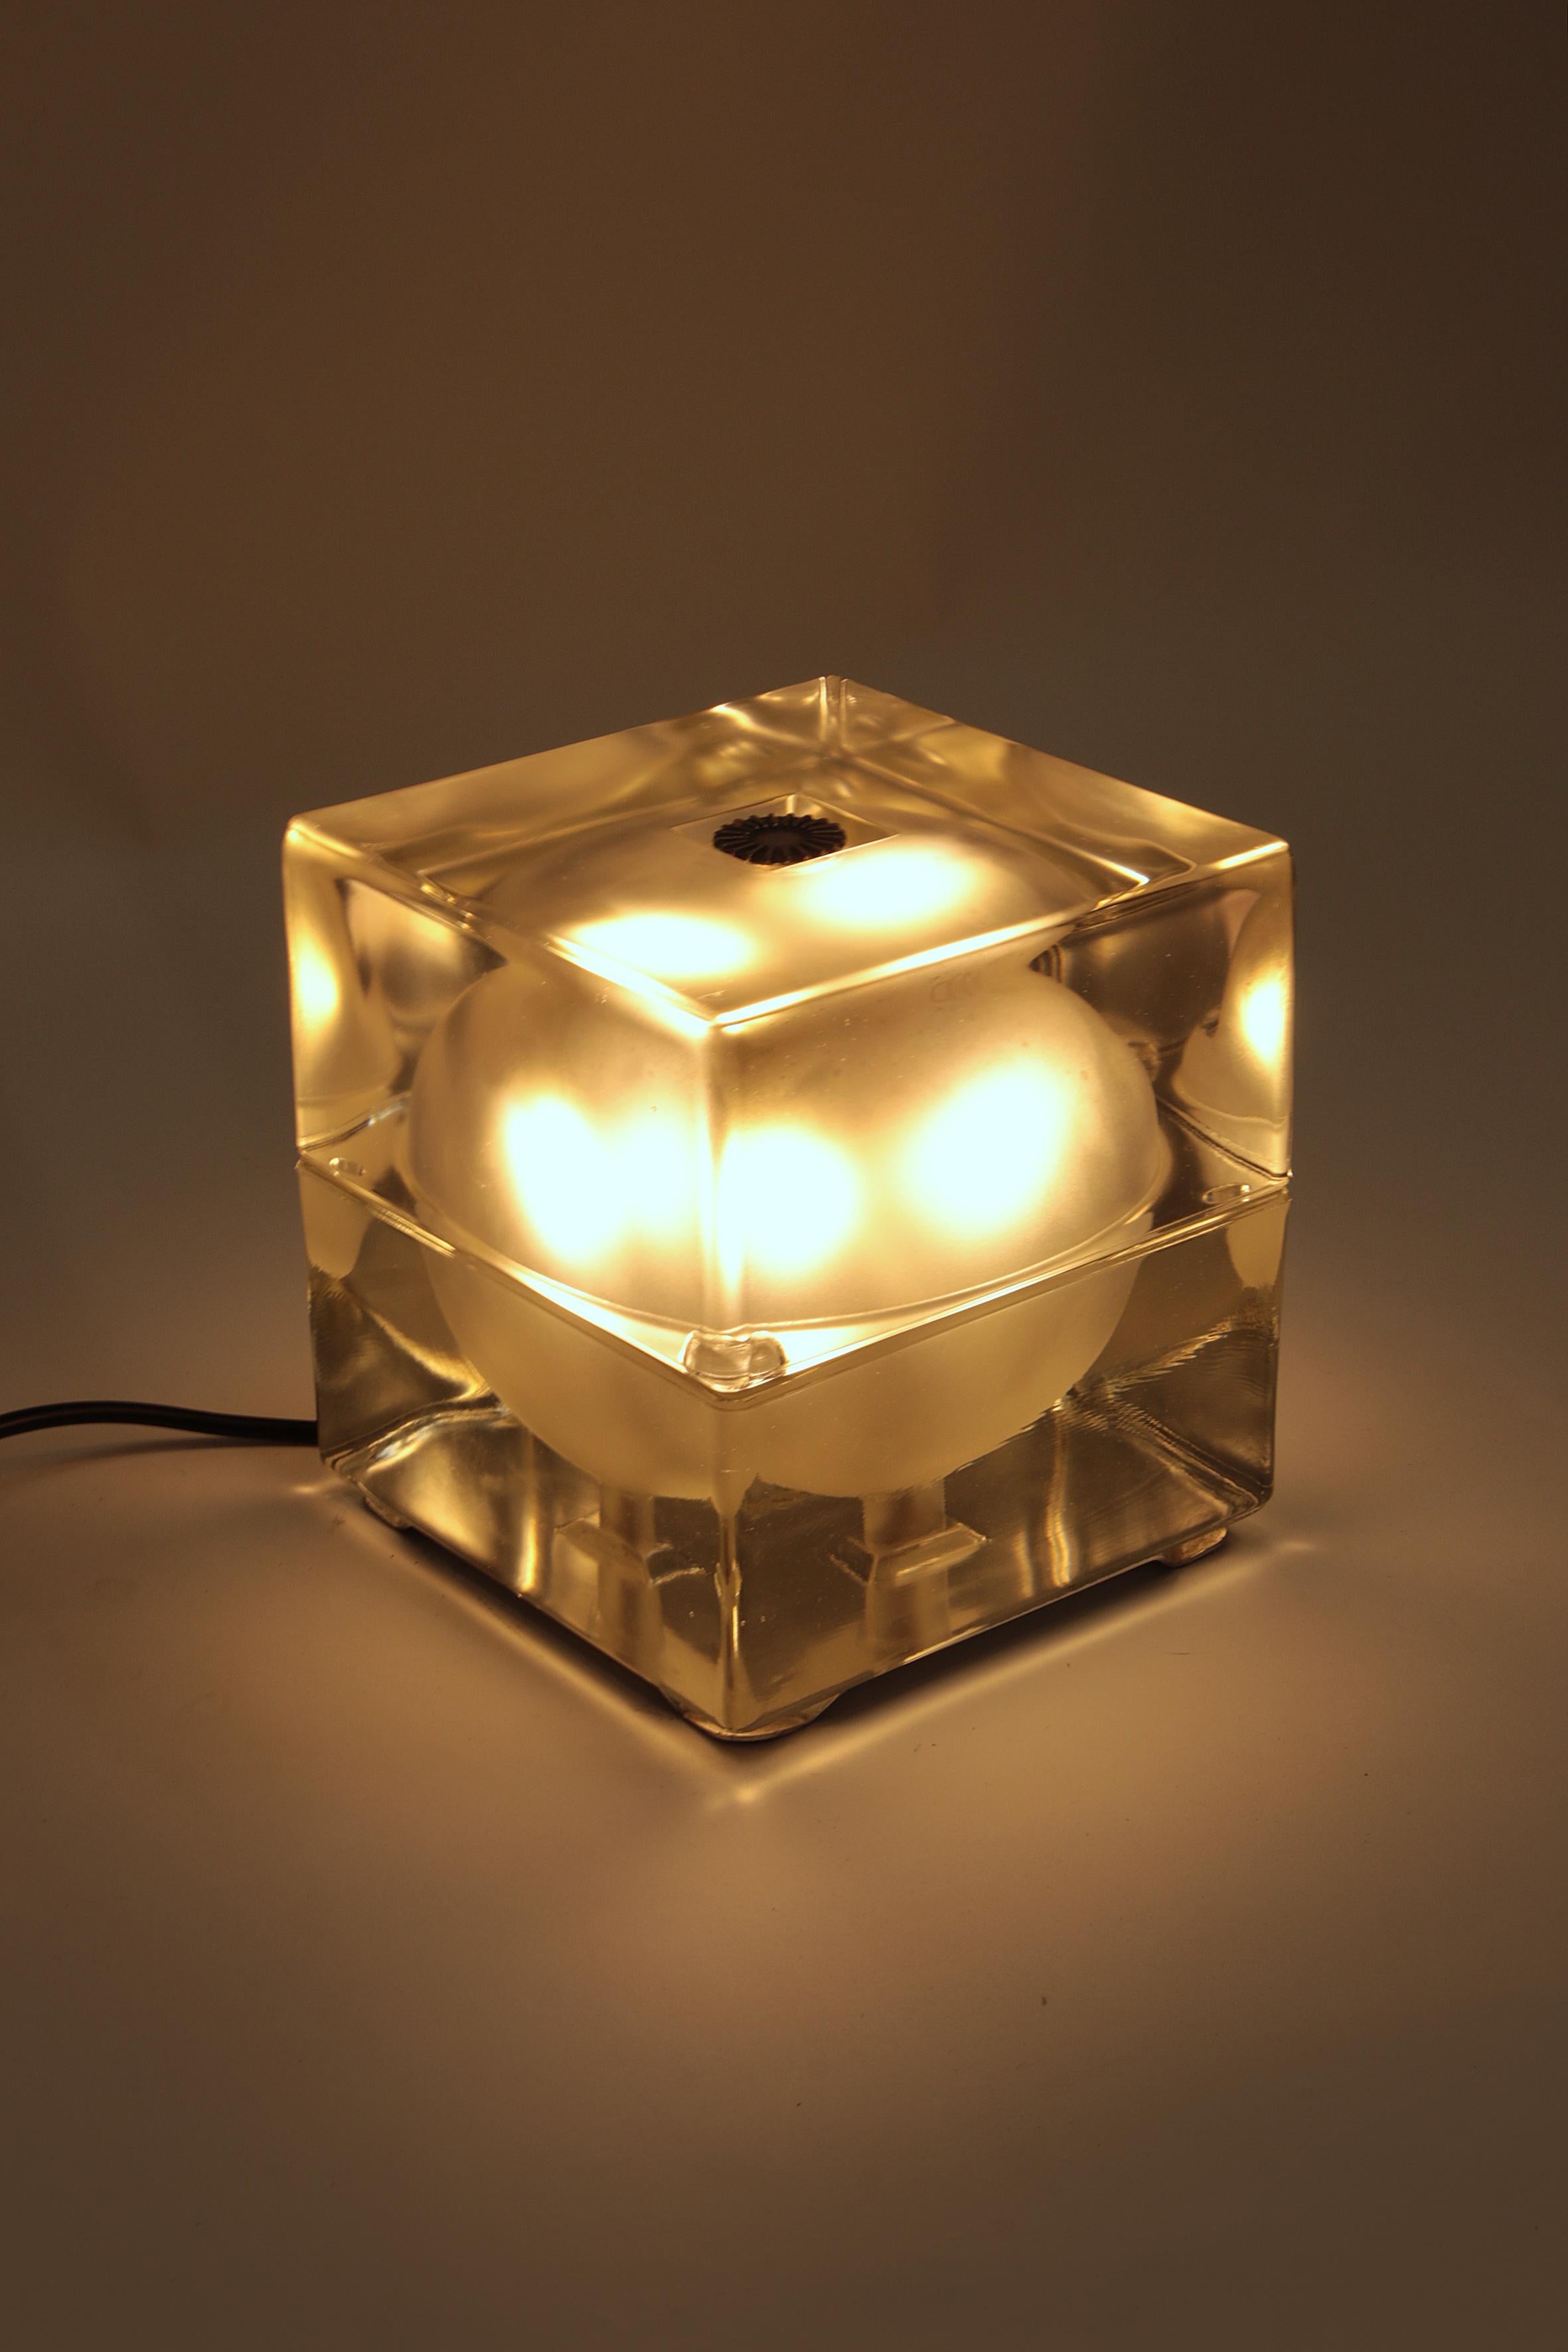 Modern Alessandro Mendini “Cubosfera” Table Lamp Metal Crome Glass 1968 Italy For Sale